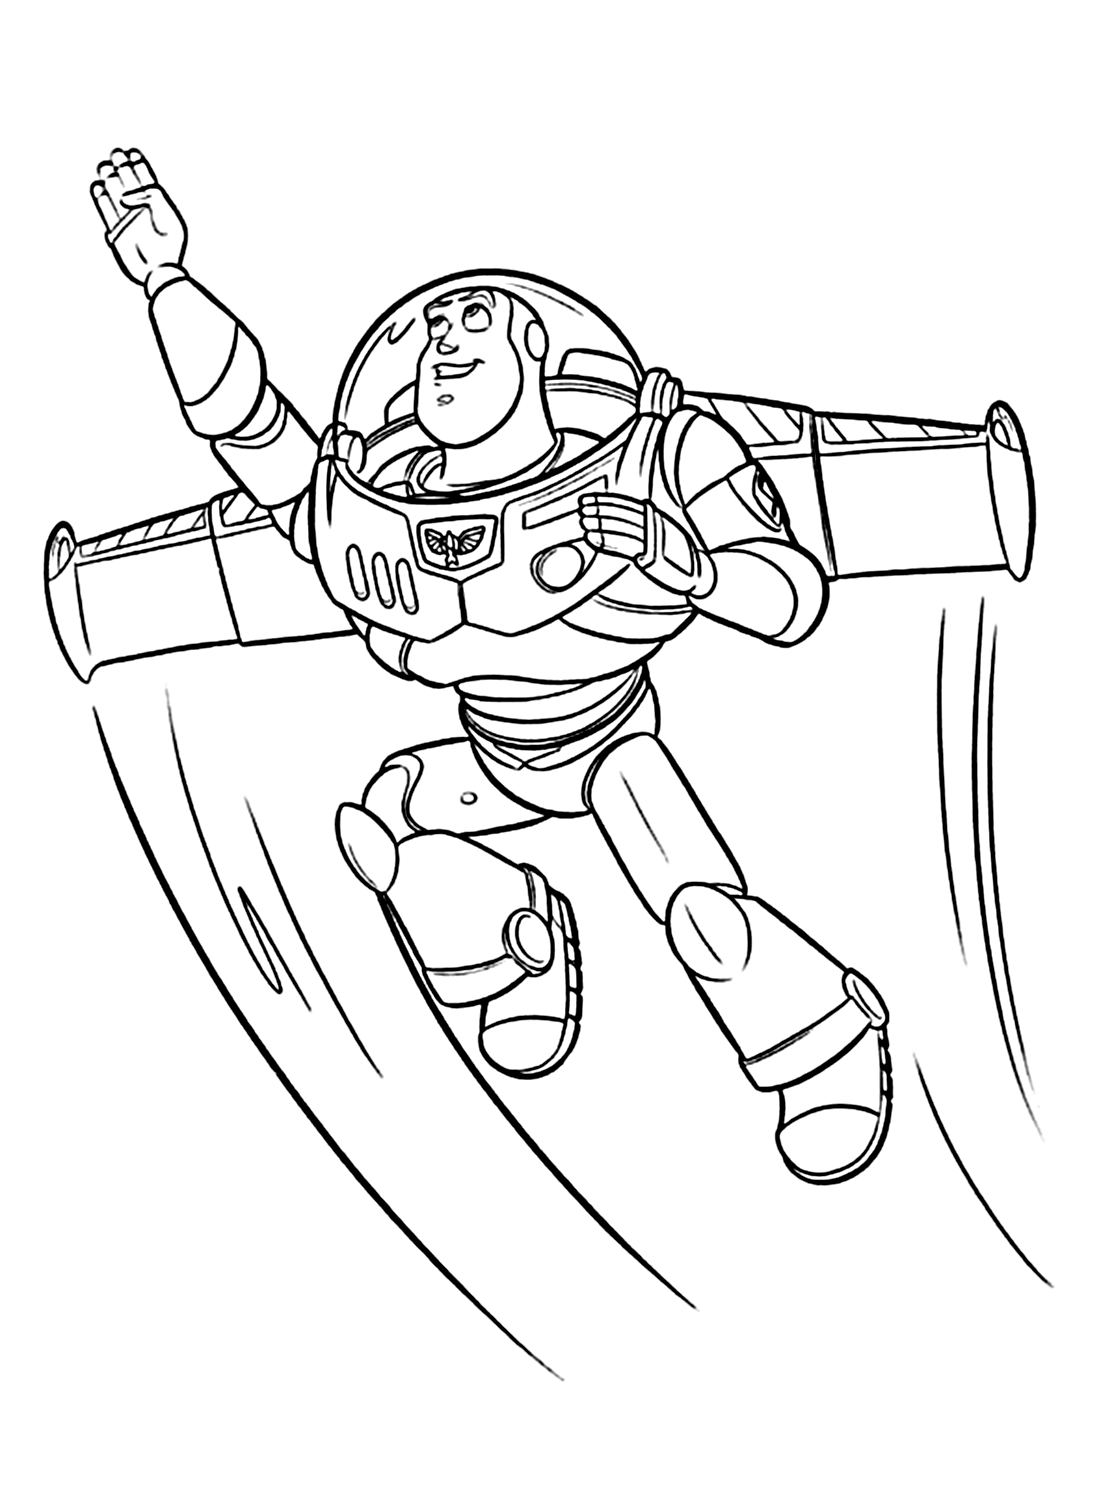 Coloring Page of Buzz Lightyear Flying